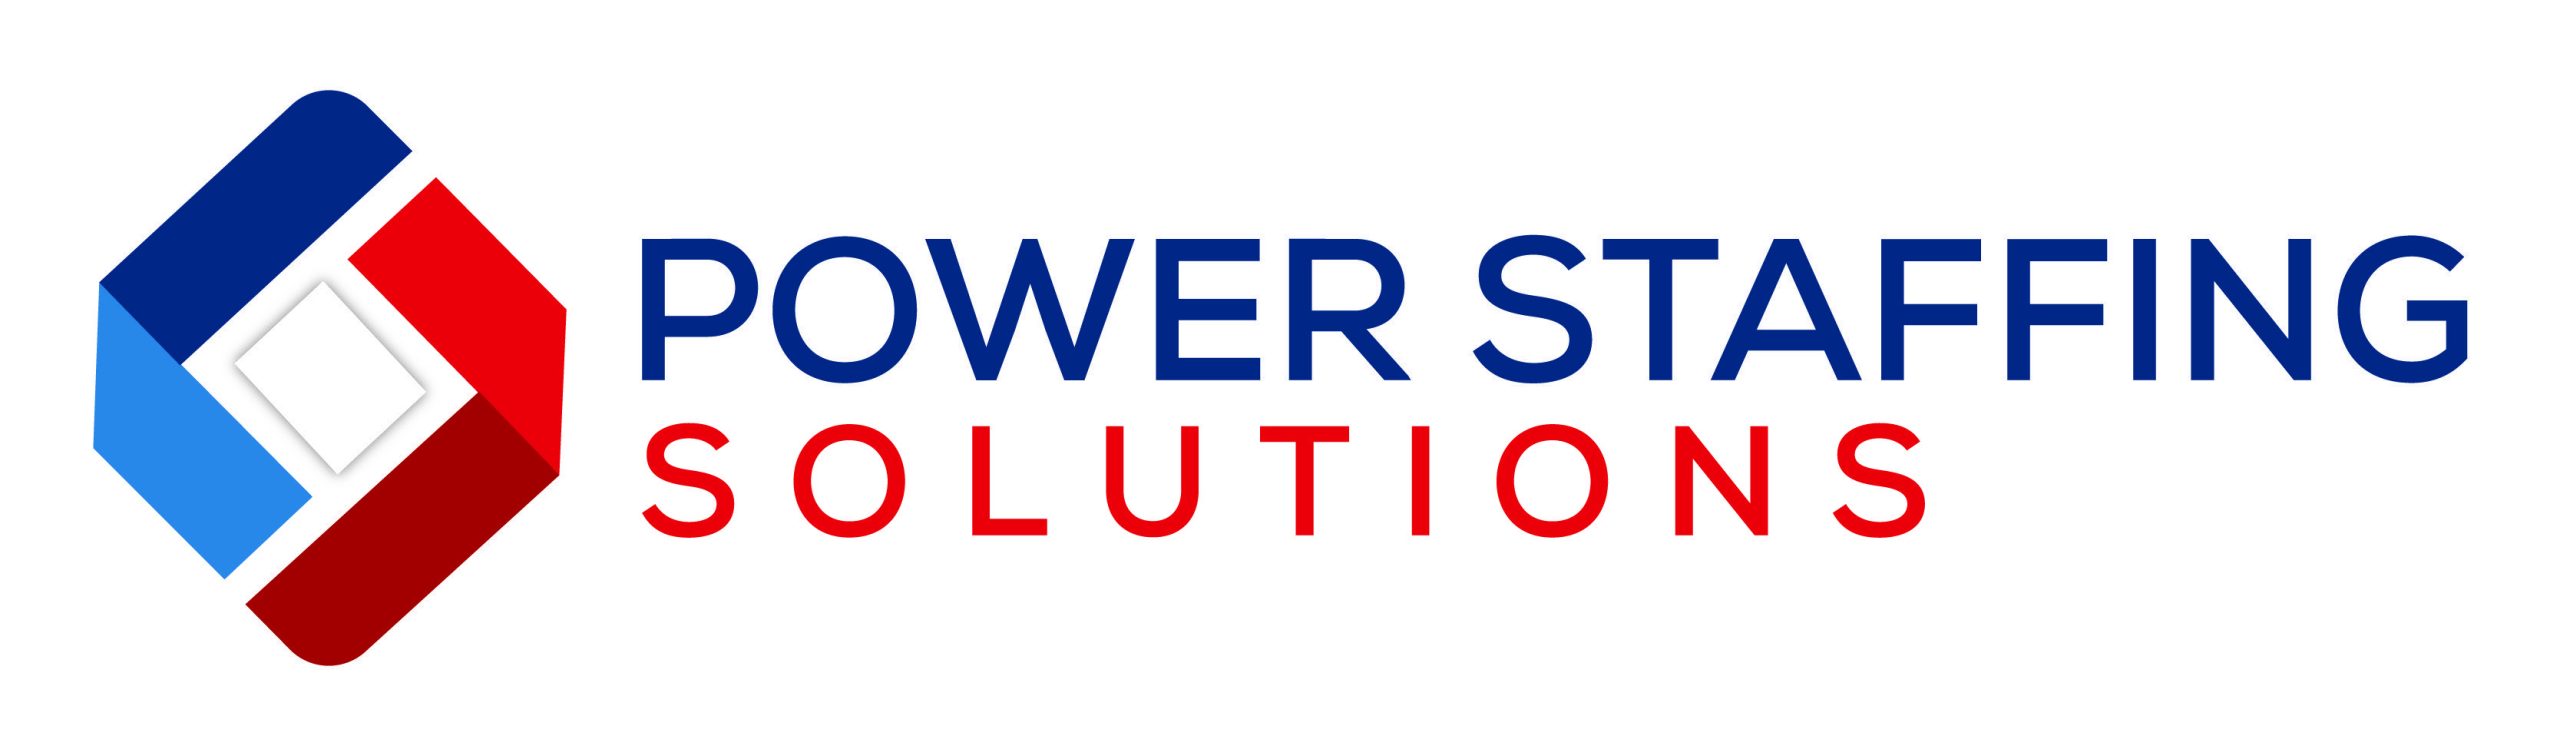 Power Staffing Solutions